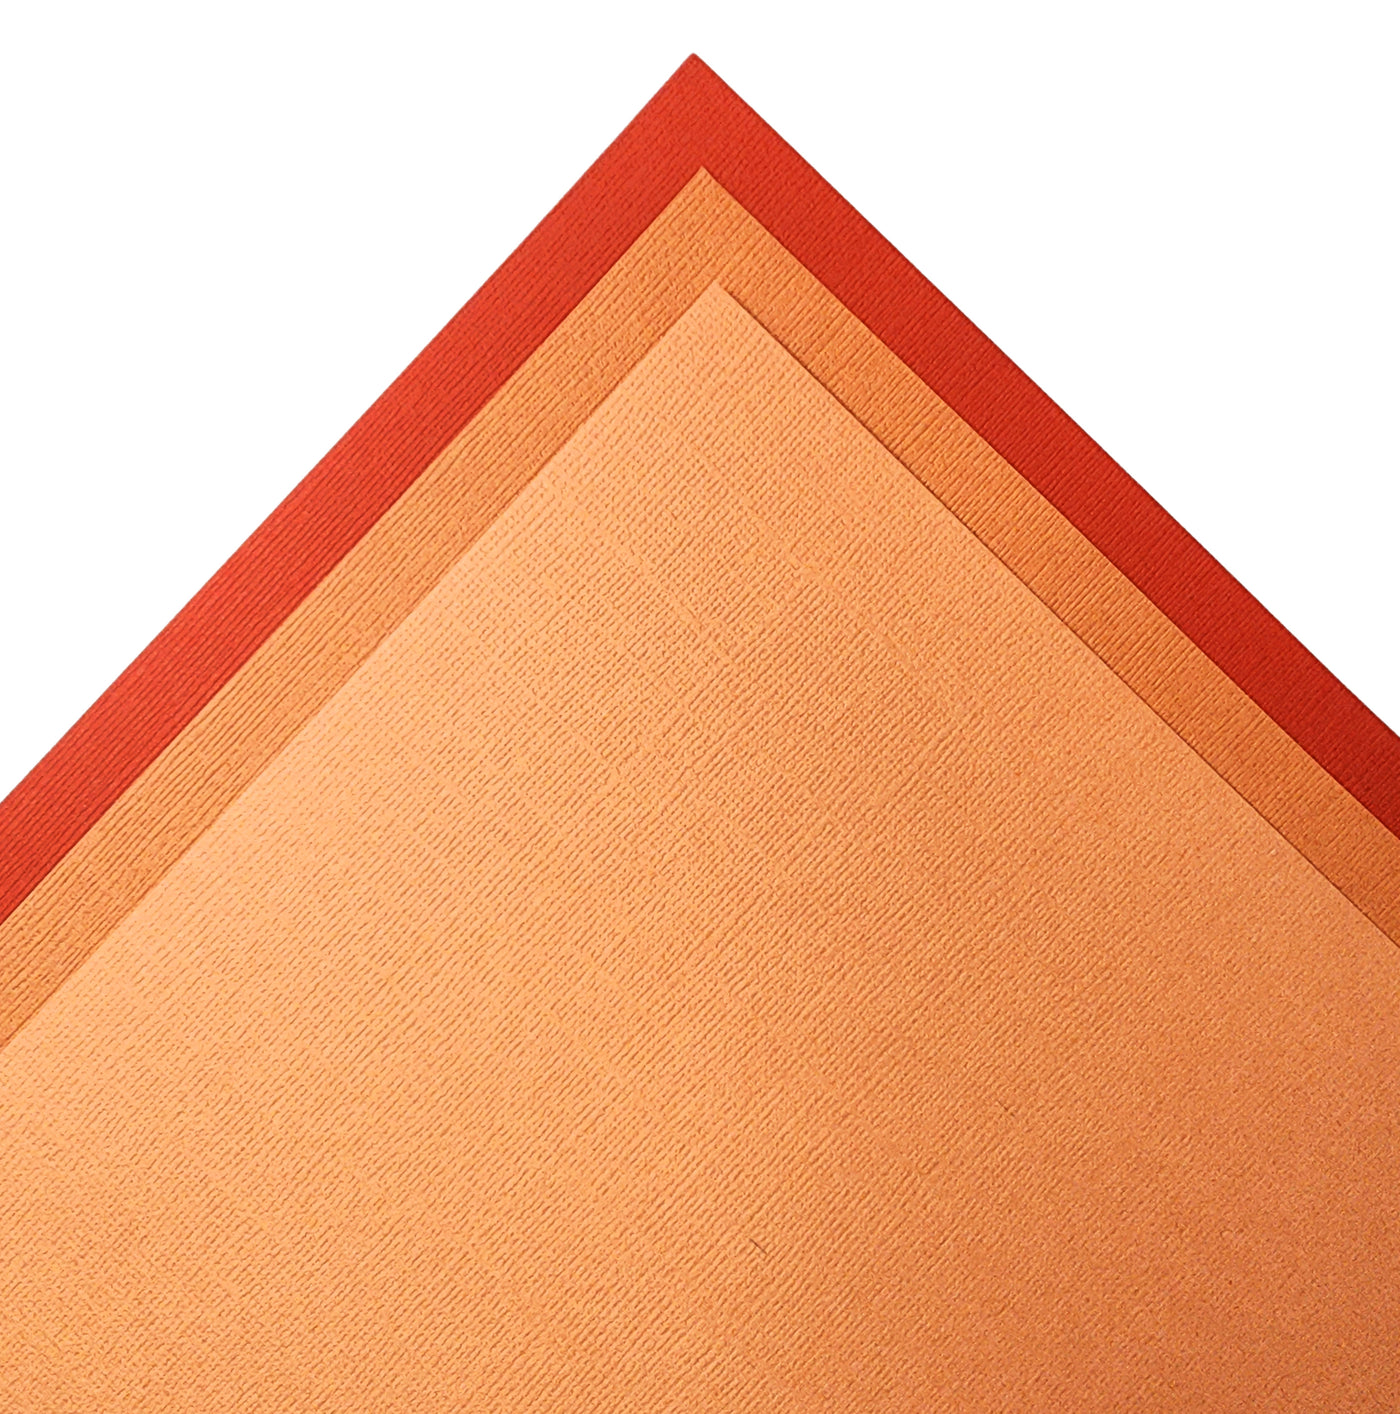 The Classic Orange monochromatic assortment includes three (3) each of four (3) shades of orange colors of Bazzill textured cardstock, Acid-free 12x12 Cardstock.